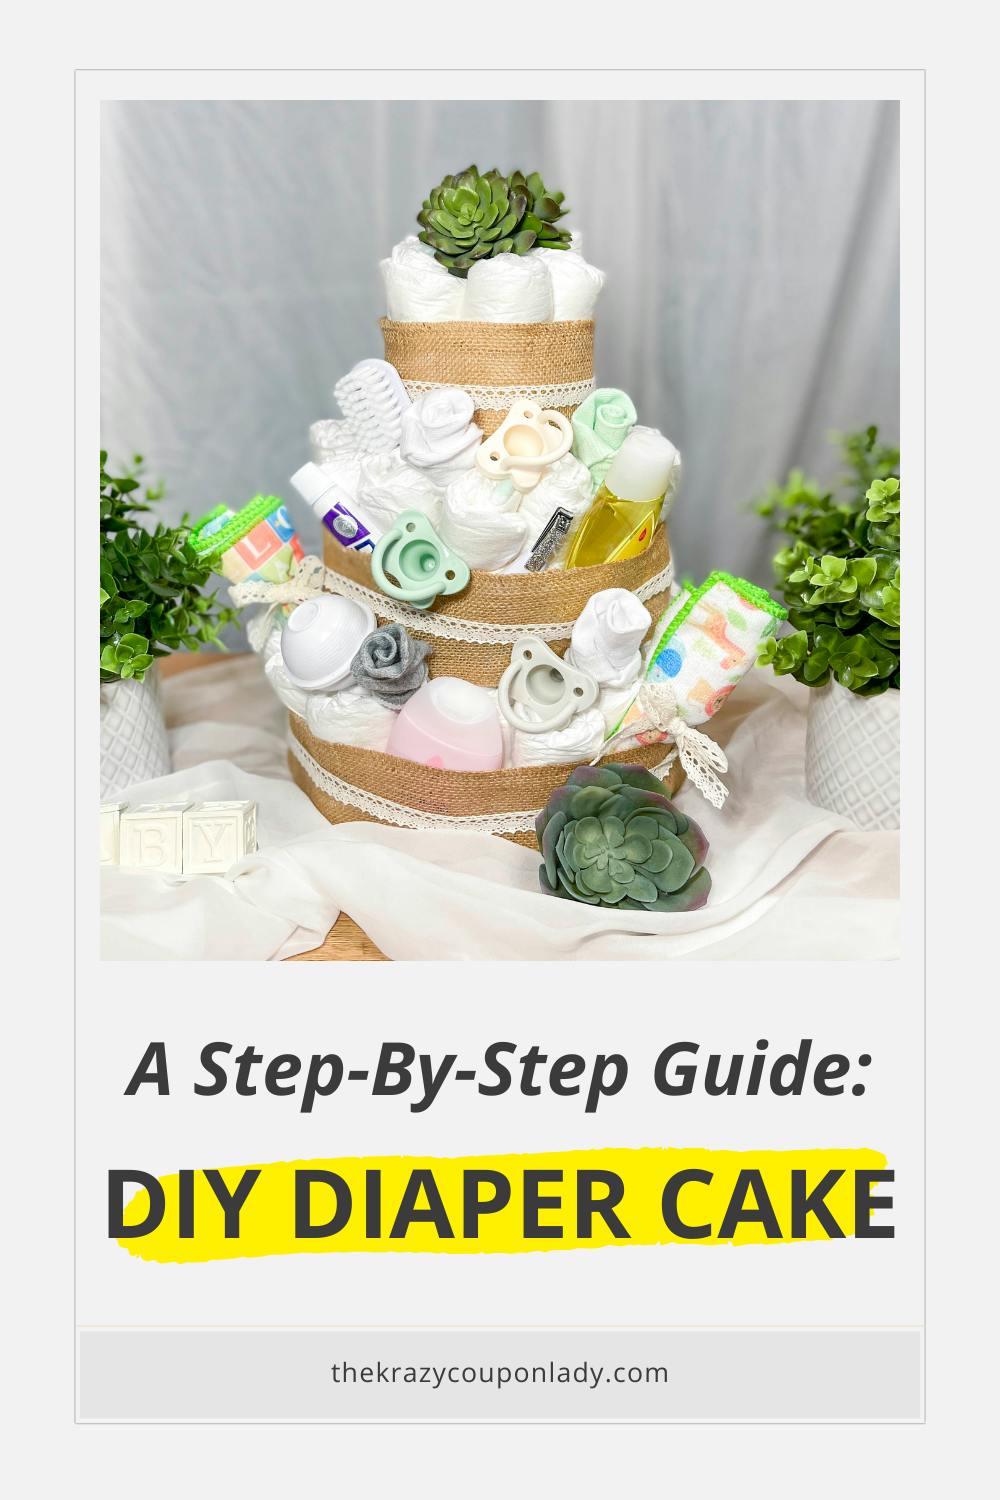 Wrap Up the Perfect Gift With a DIY Diaper Cake: A Step-by-Step Guide